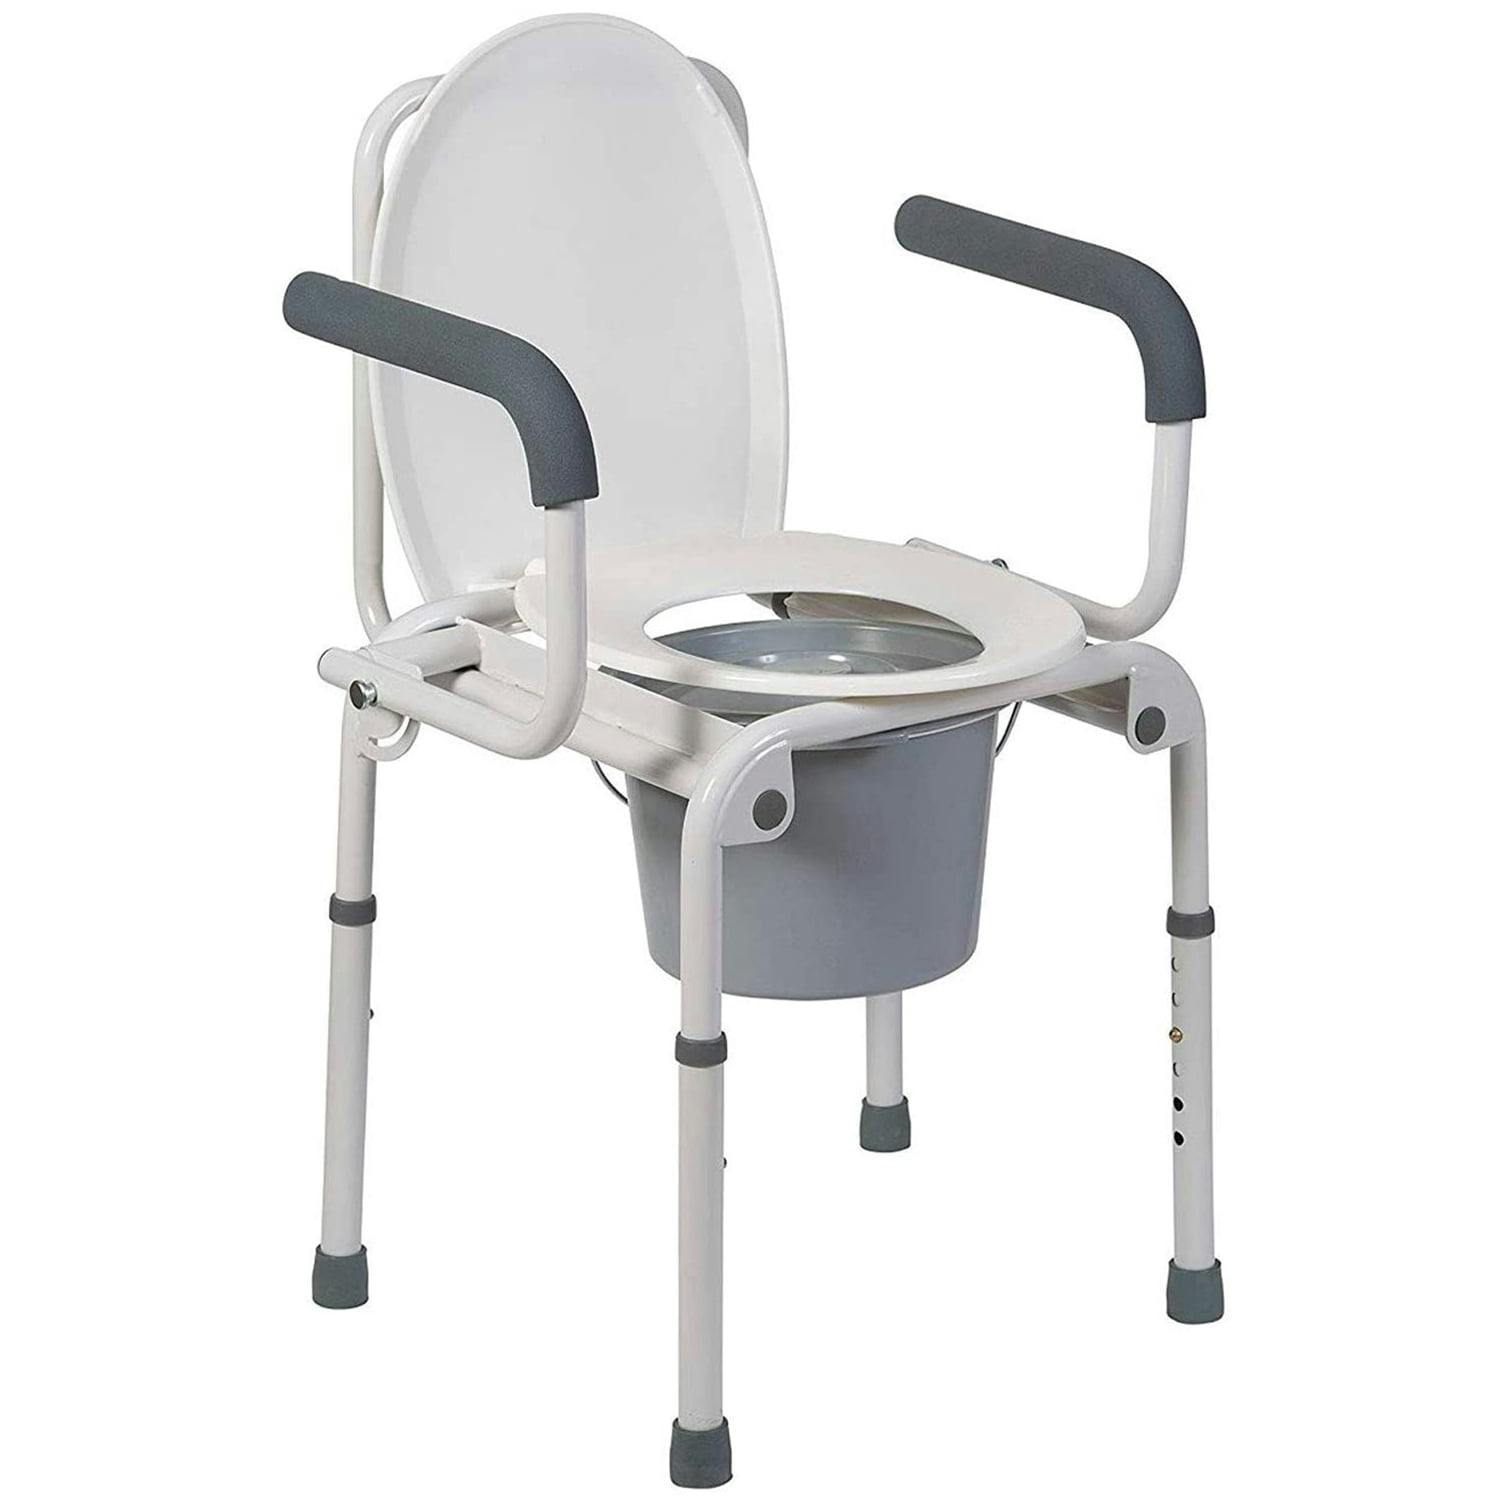 Easy-Transfer Steel Frame Portable Commode with Adjustable Seat Height